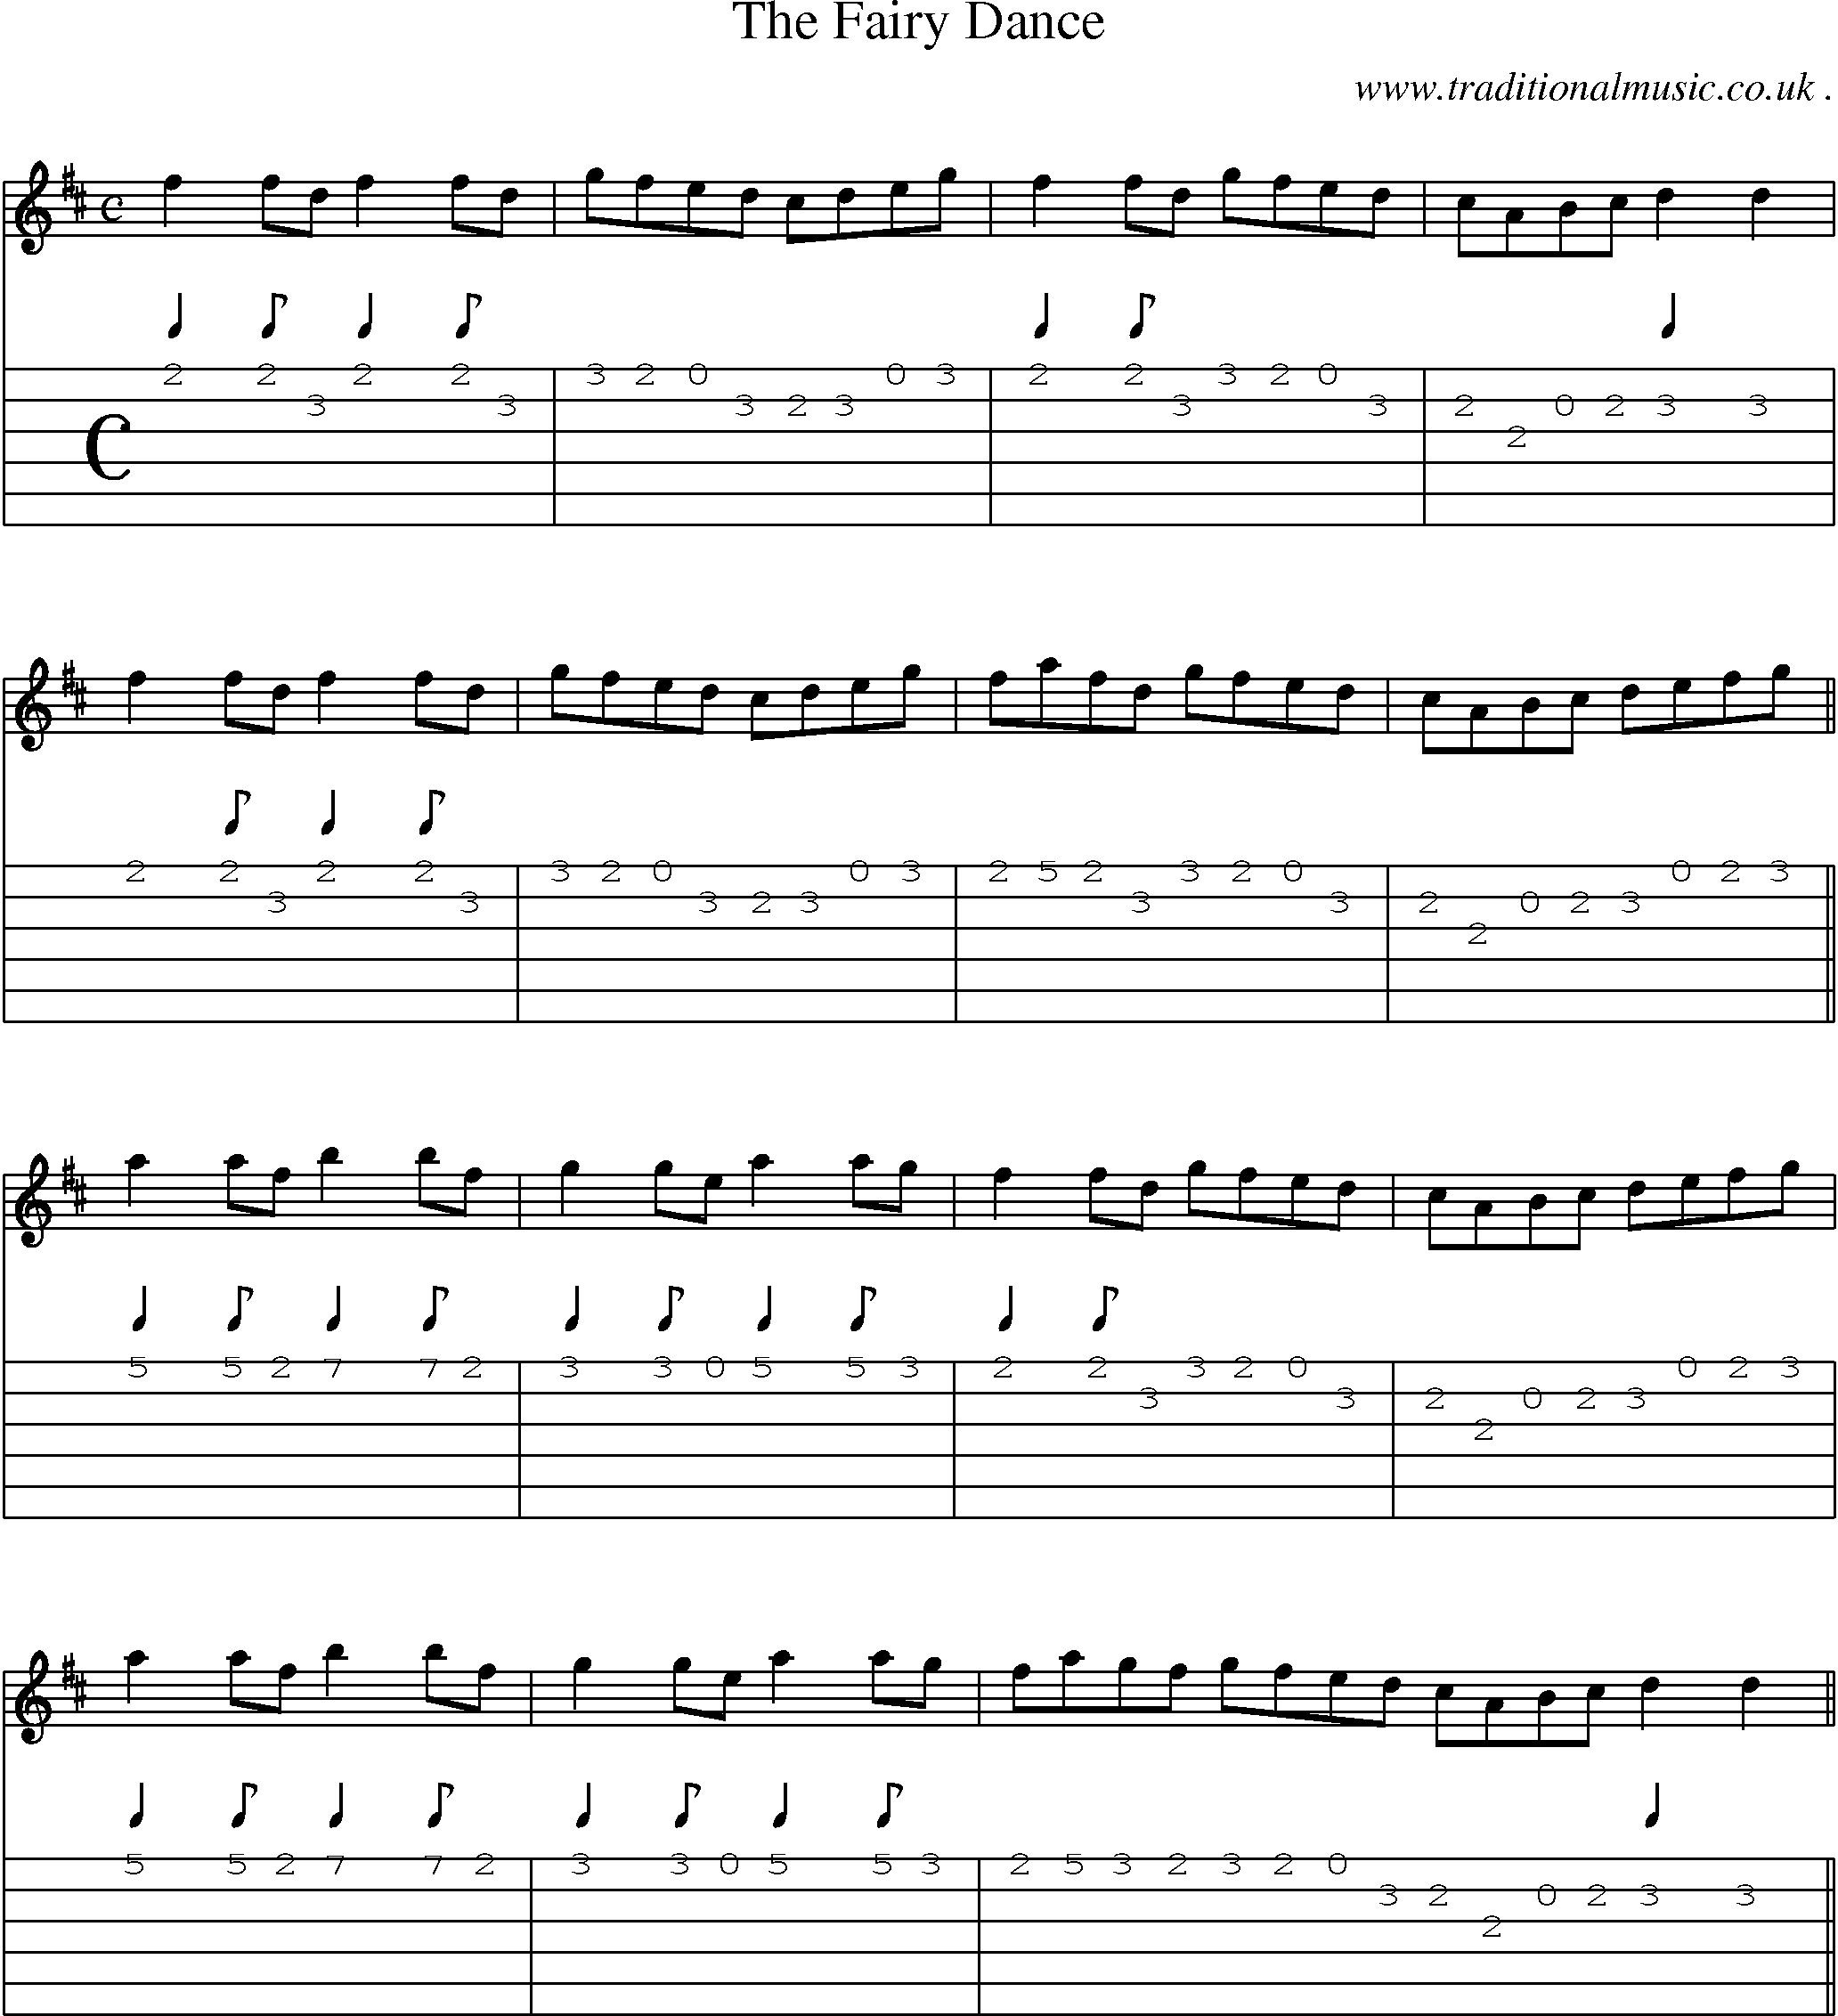 Sheet-Music and Guitar Tabs for The Fairy Dance